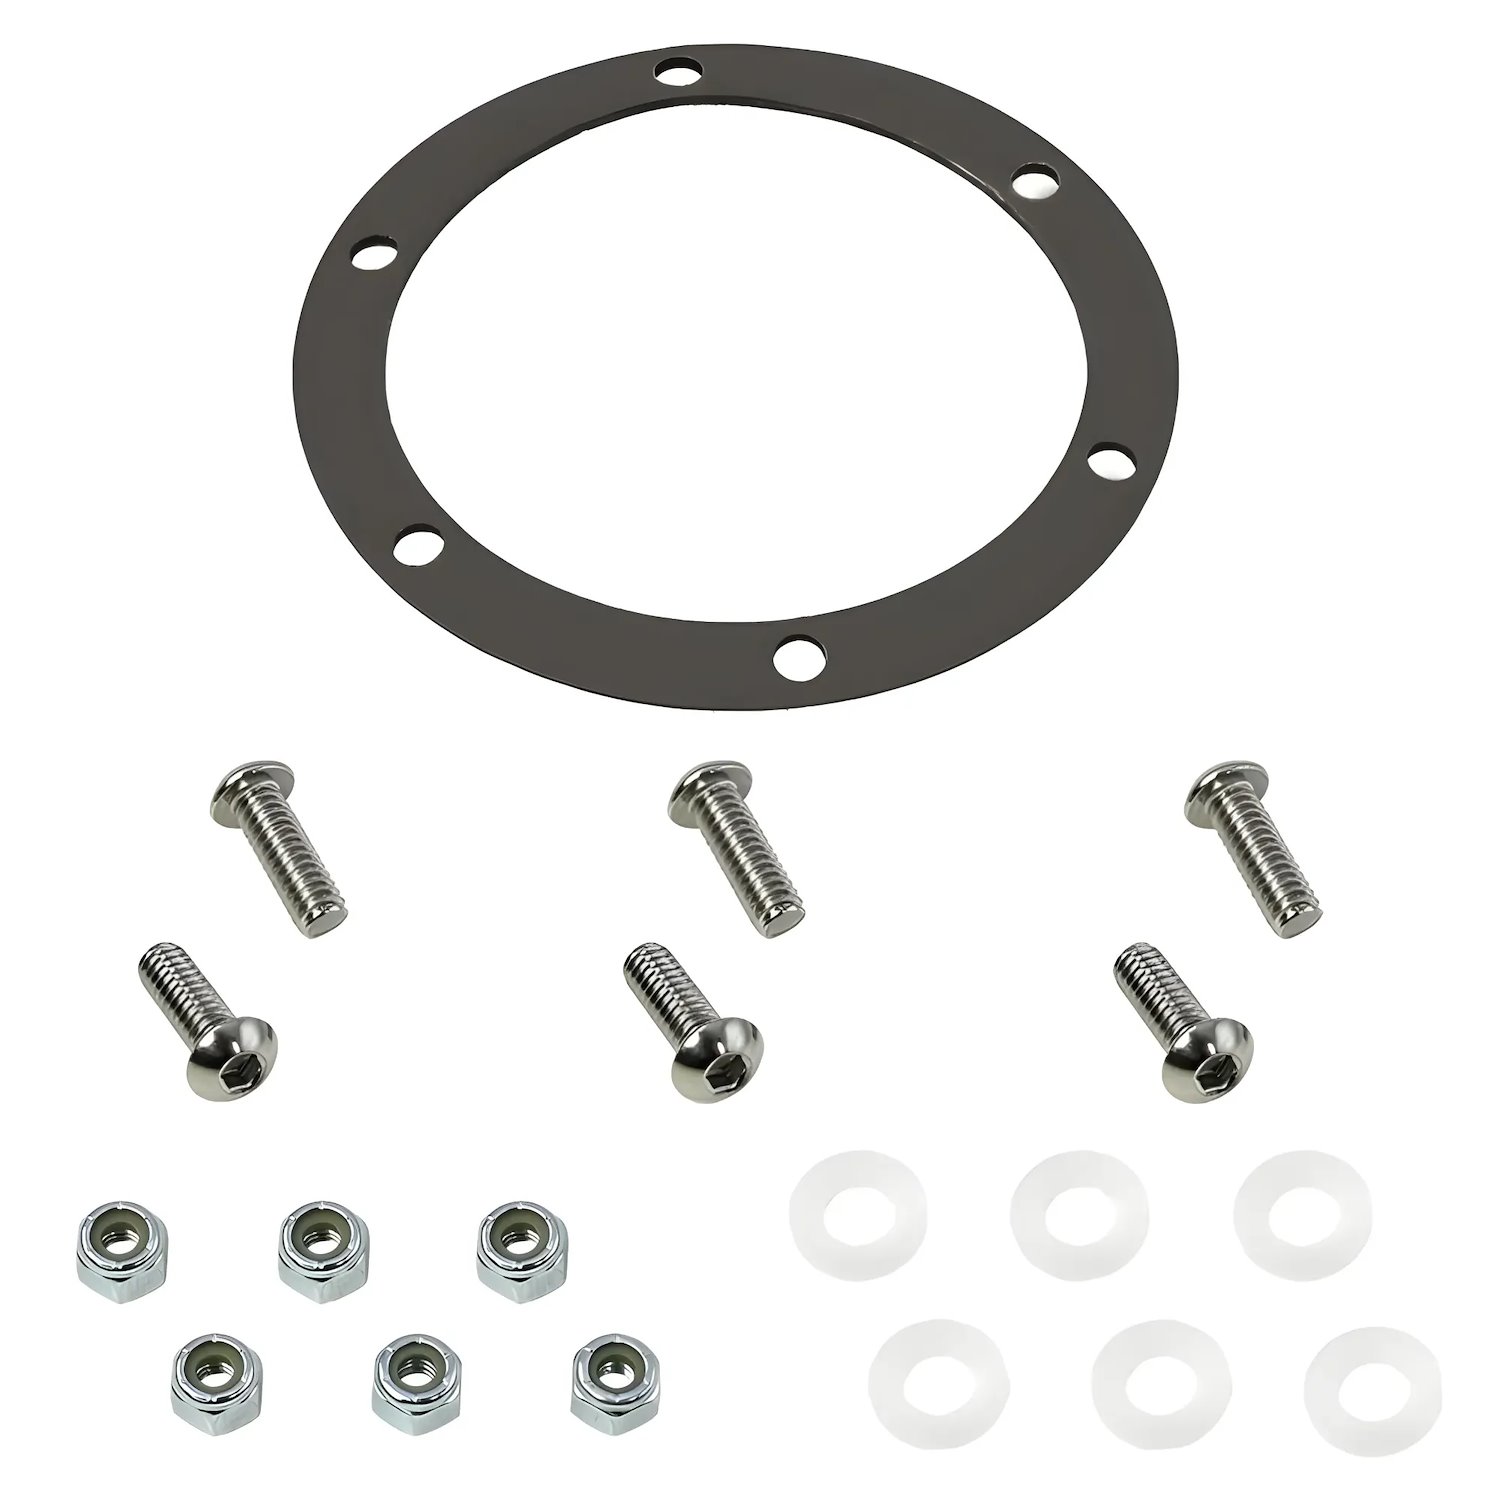 00-12505-HDW Fuel Cell Lid Hardware Kit